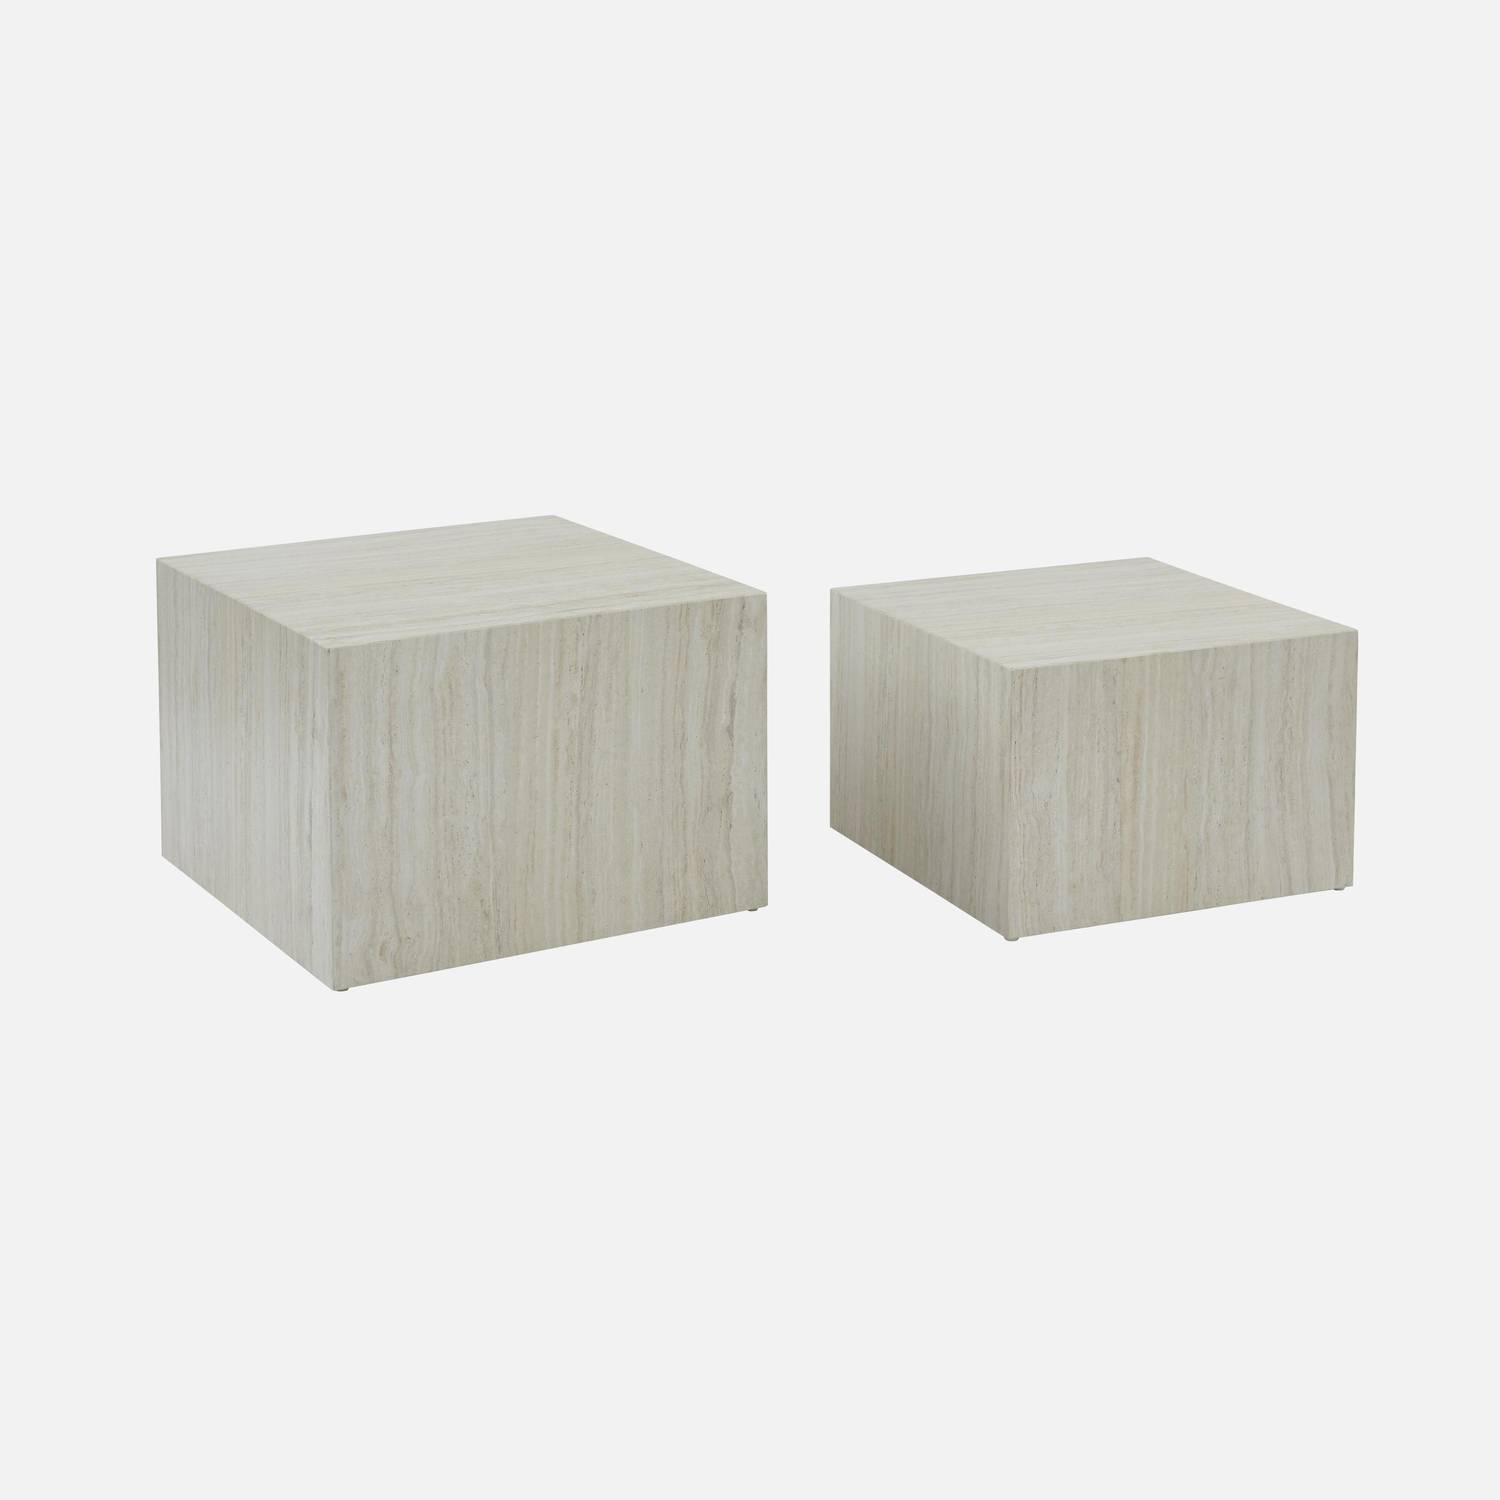 Set of 2 square coffee tables with marble effect, white, L50xW50xH33cm &  L58xW58xH40cm, Paros Photo5